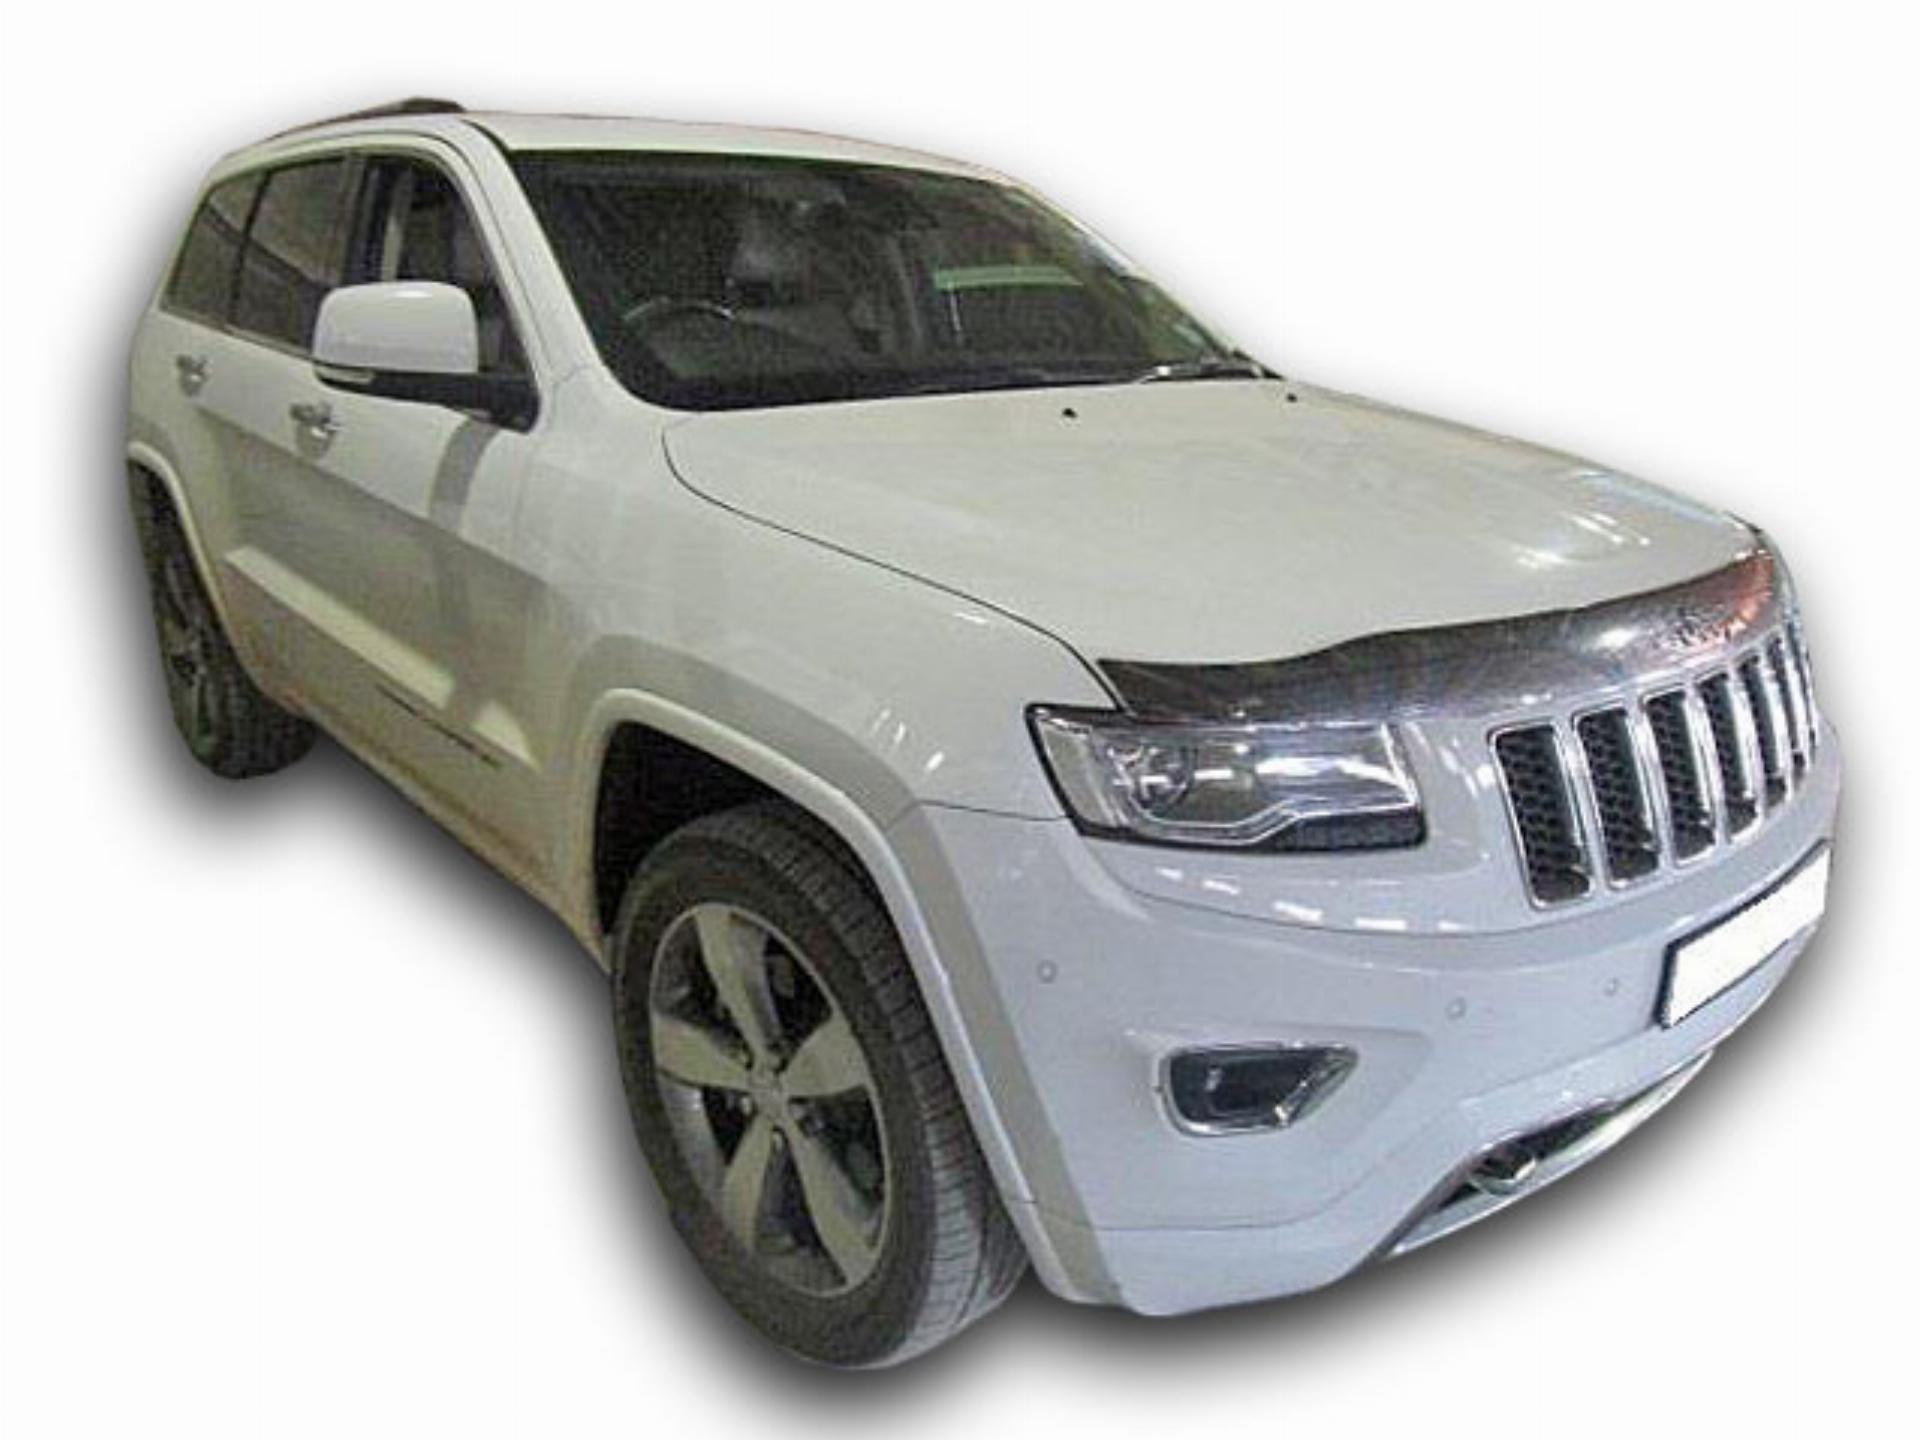 Repossessed Jeep Grand Cherokee 3.0L CRD 2016 on auction